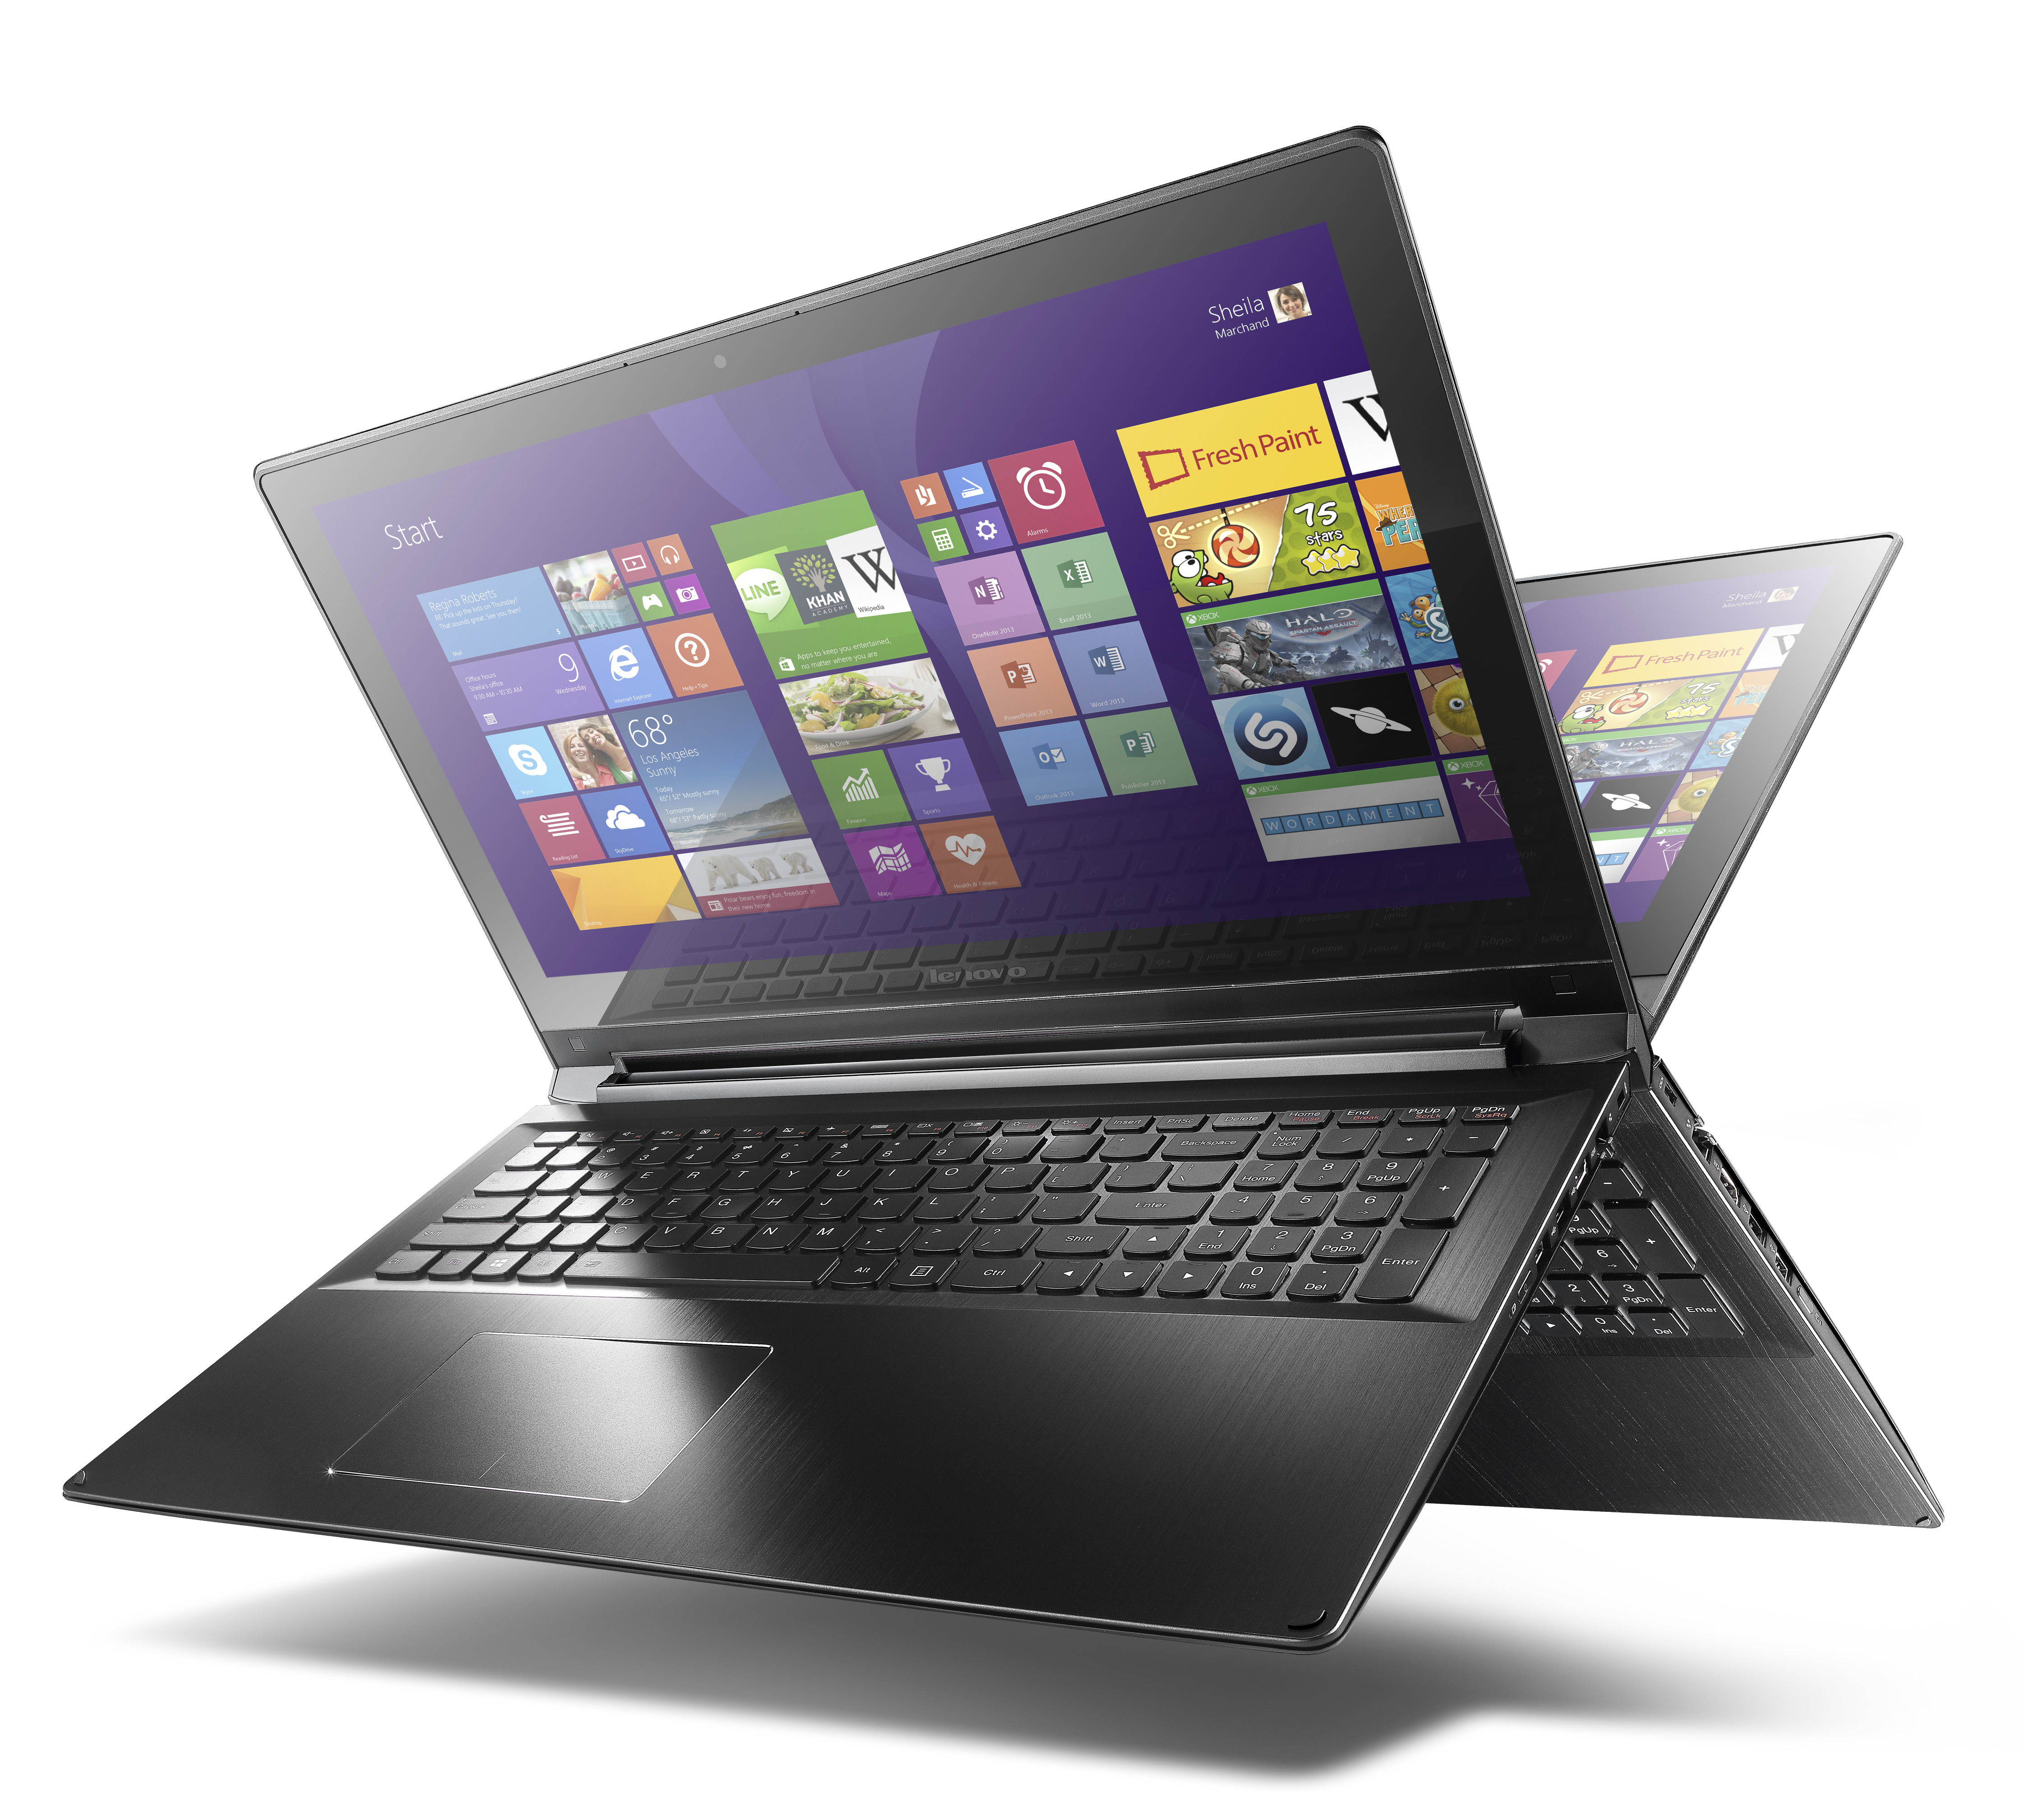 IFA 2014 Lenovo Launches More PCs From Laptops To Tabletops